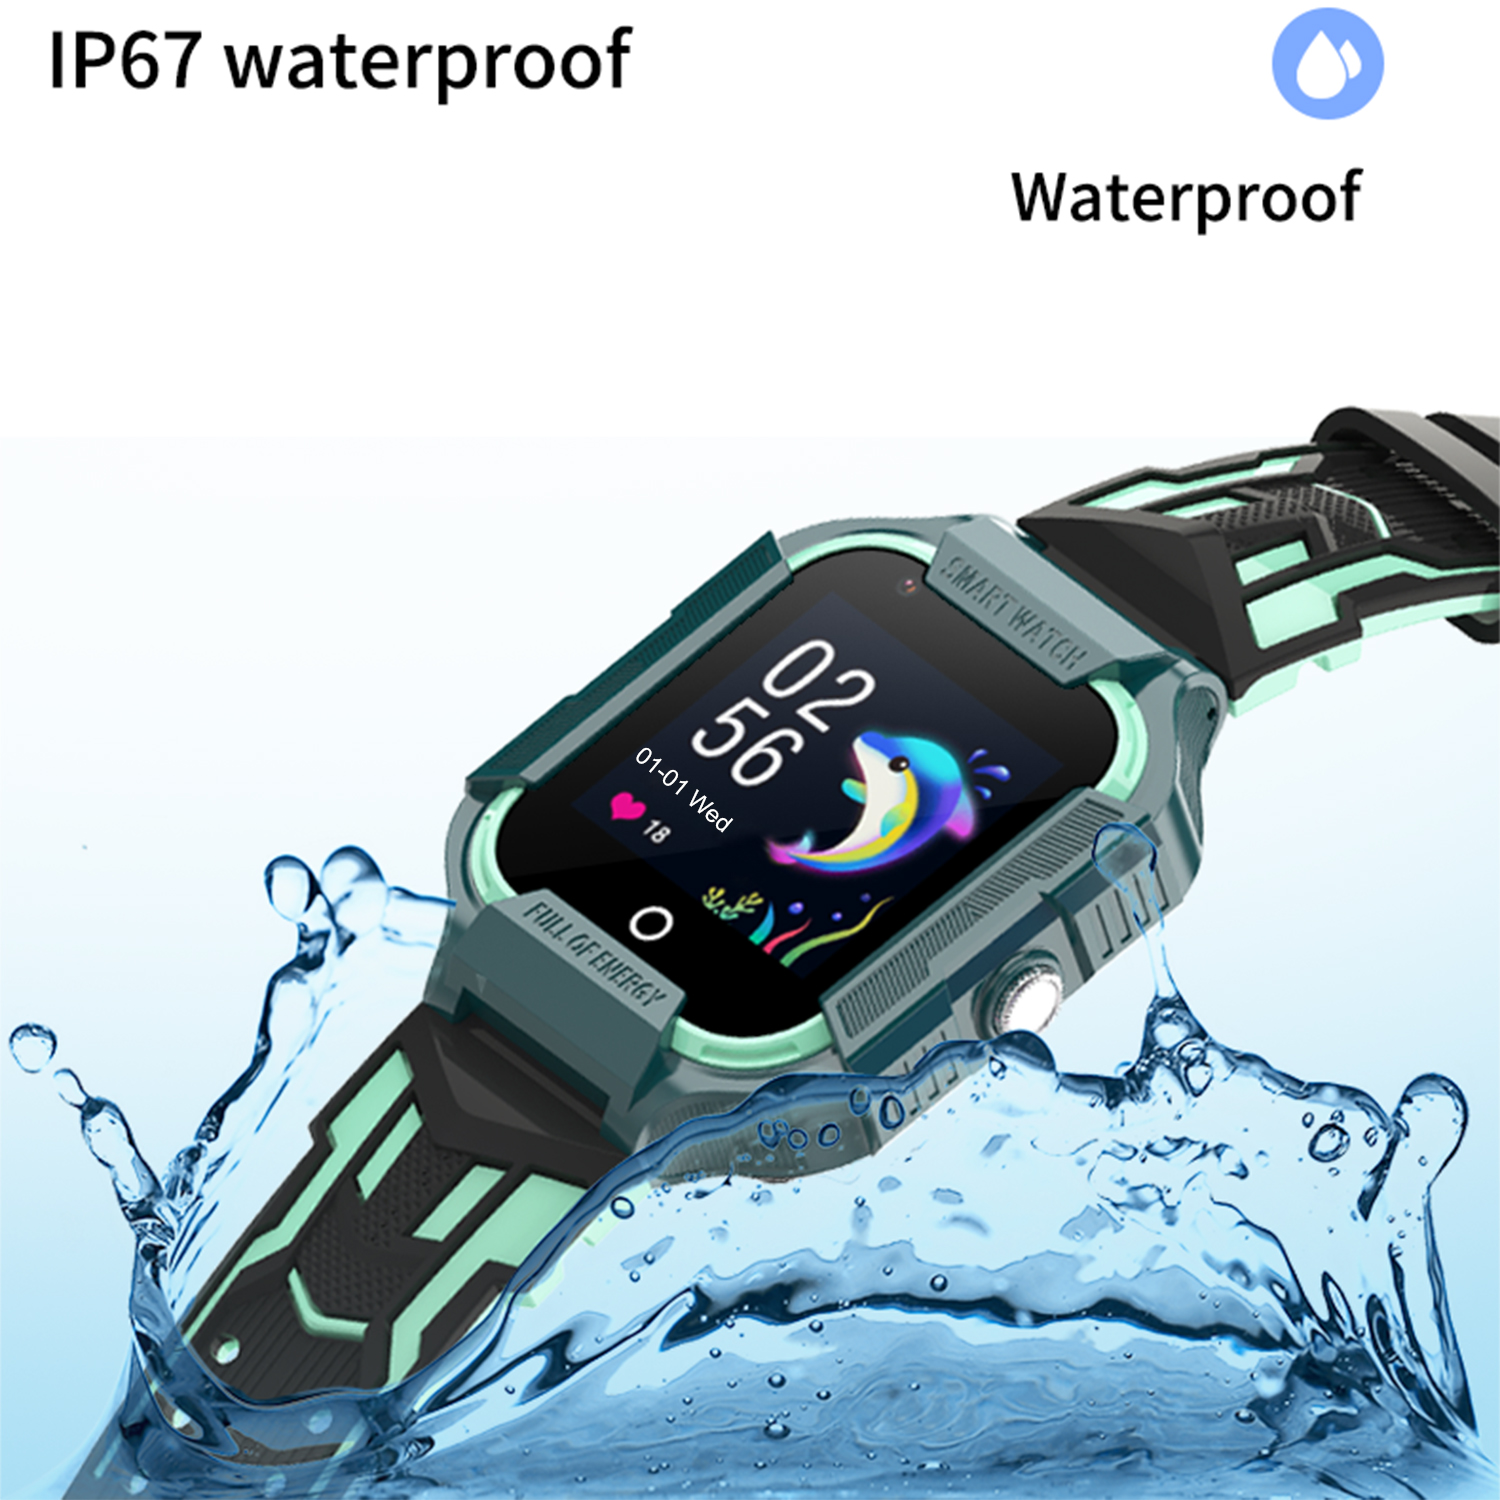 New 4G IP67 Waterproof GPS Smart watch for personal Security 